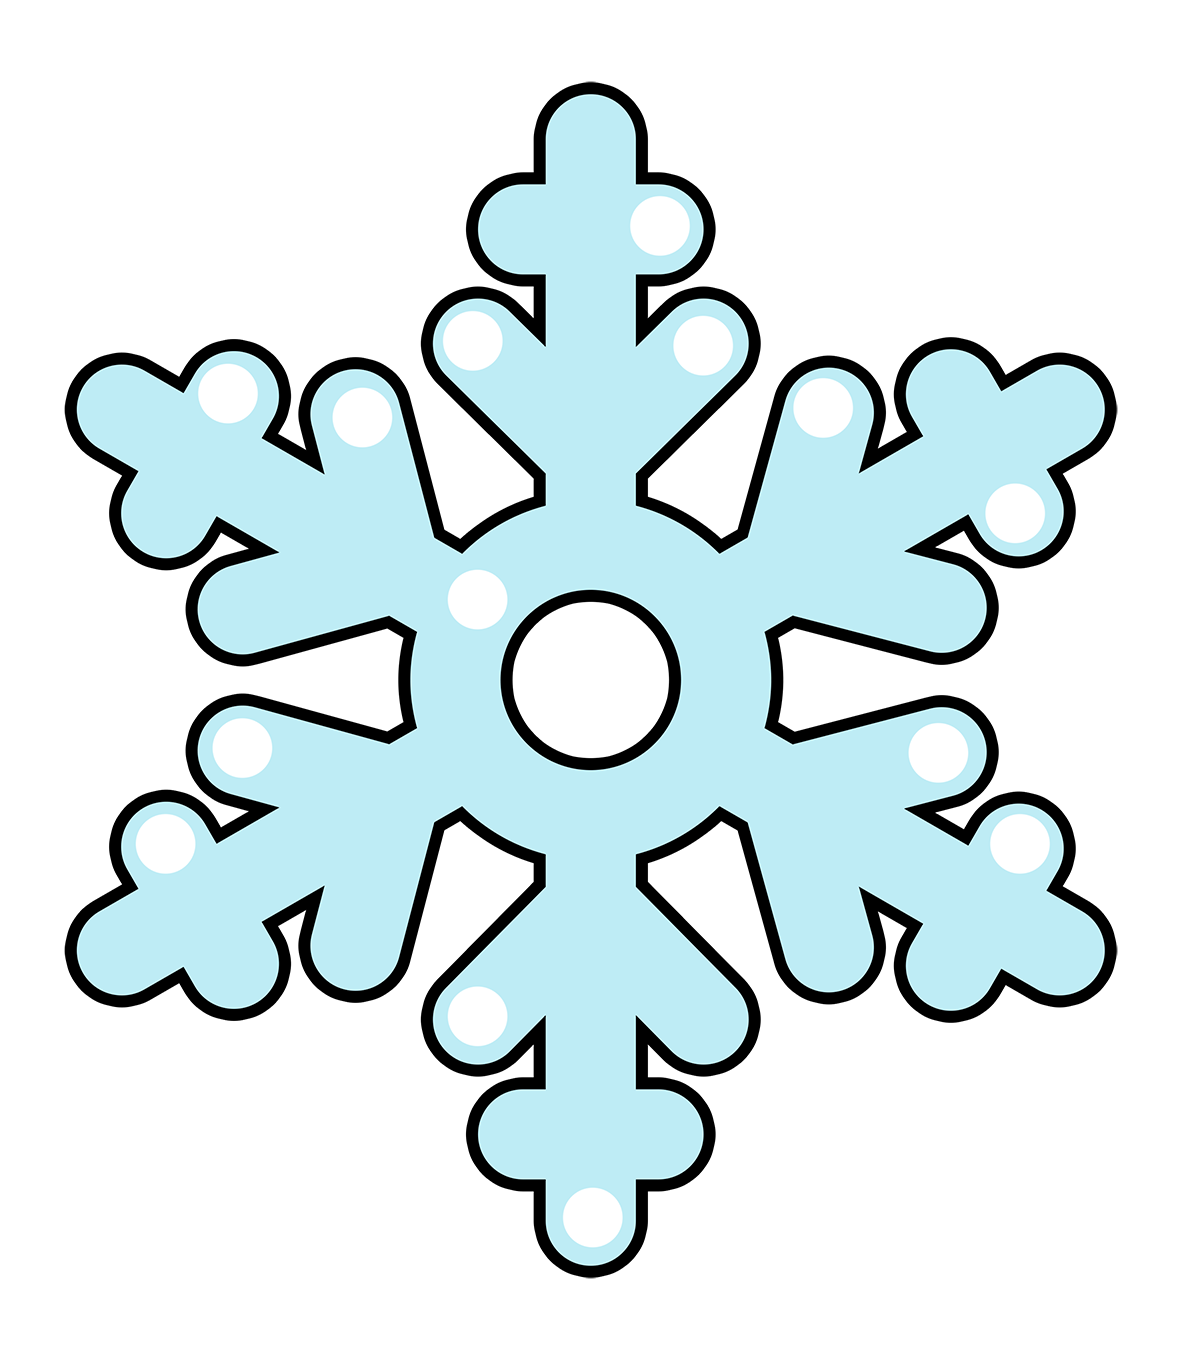 Animated snow falling clipart | ClipartMonk - Free Clip Art Images